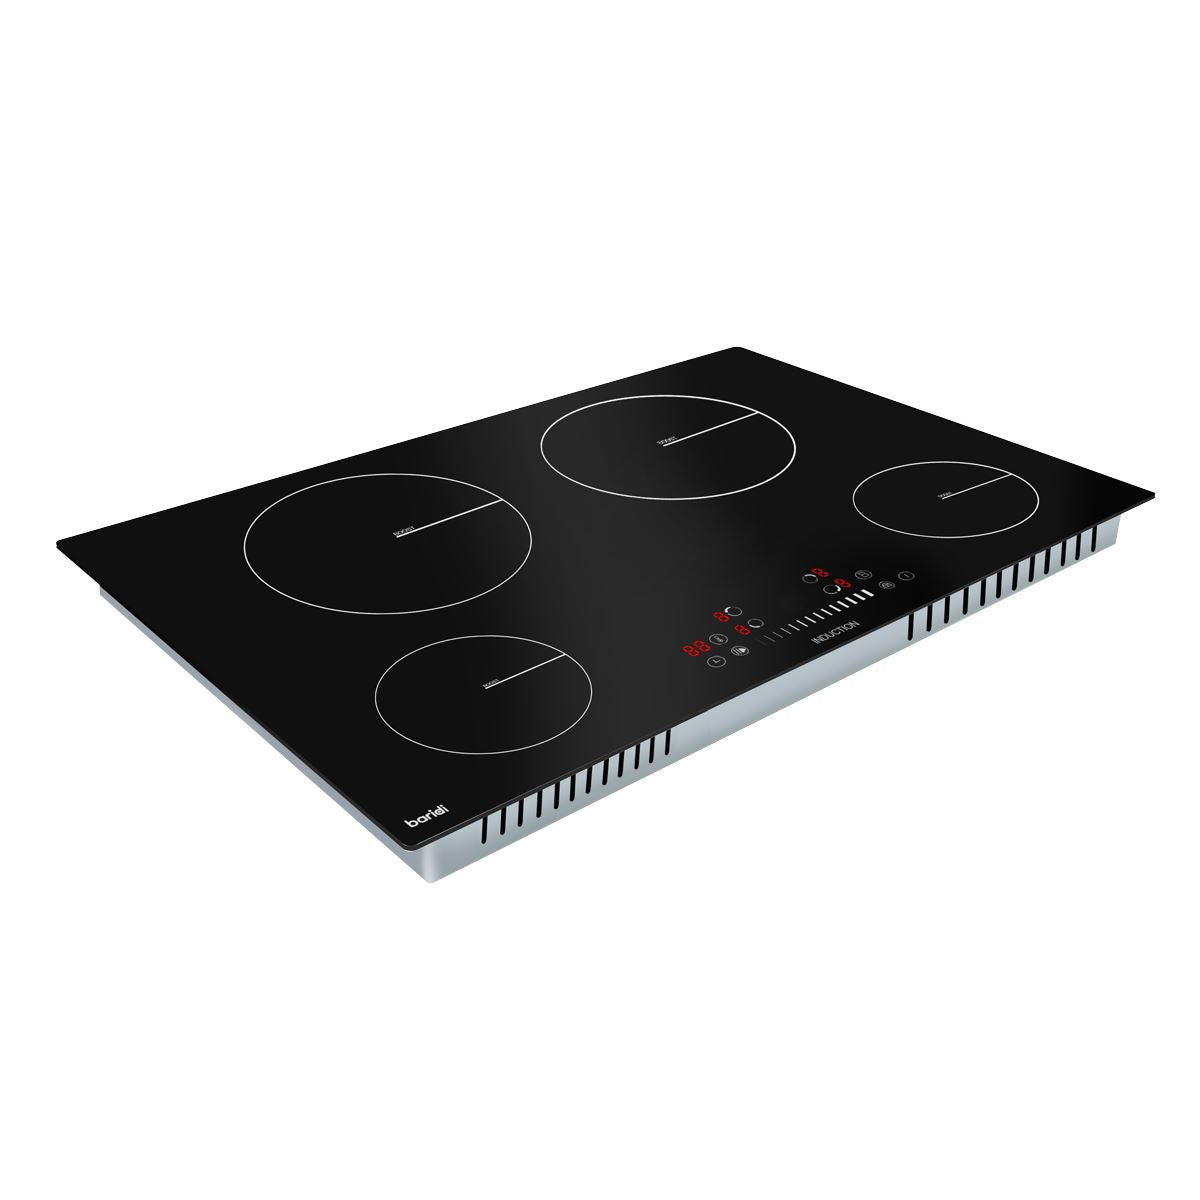 Baridi 77cm Built-In Induction Hob with 4 Cooking Zones, 7200W, Boost Function, 9 Power Levels, Touch Control & Timer, Hardwired